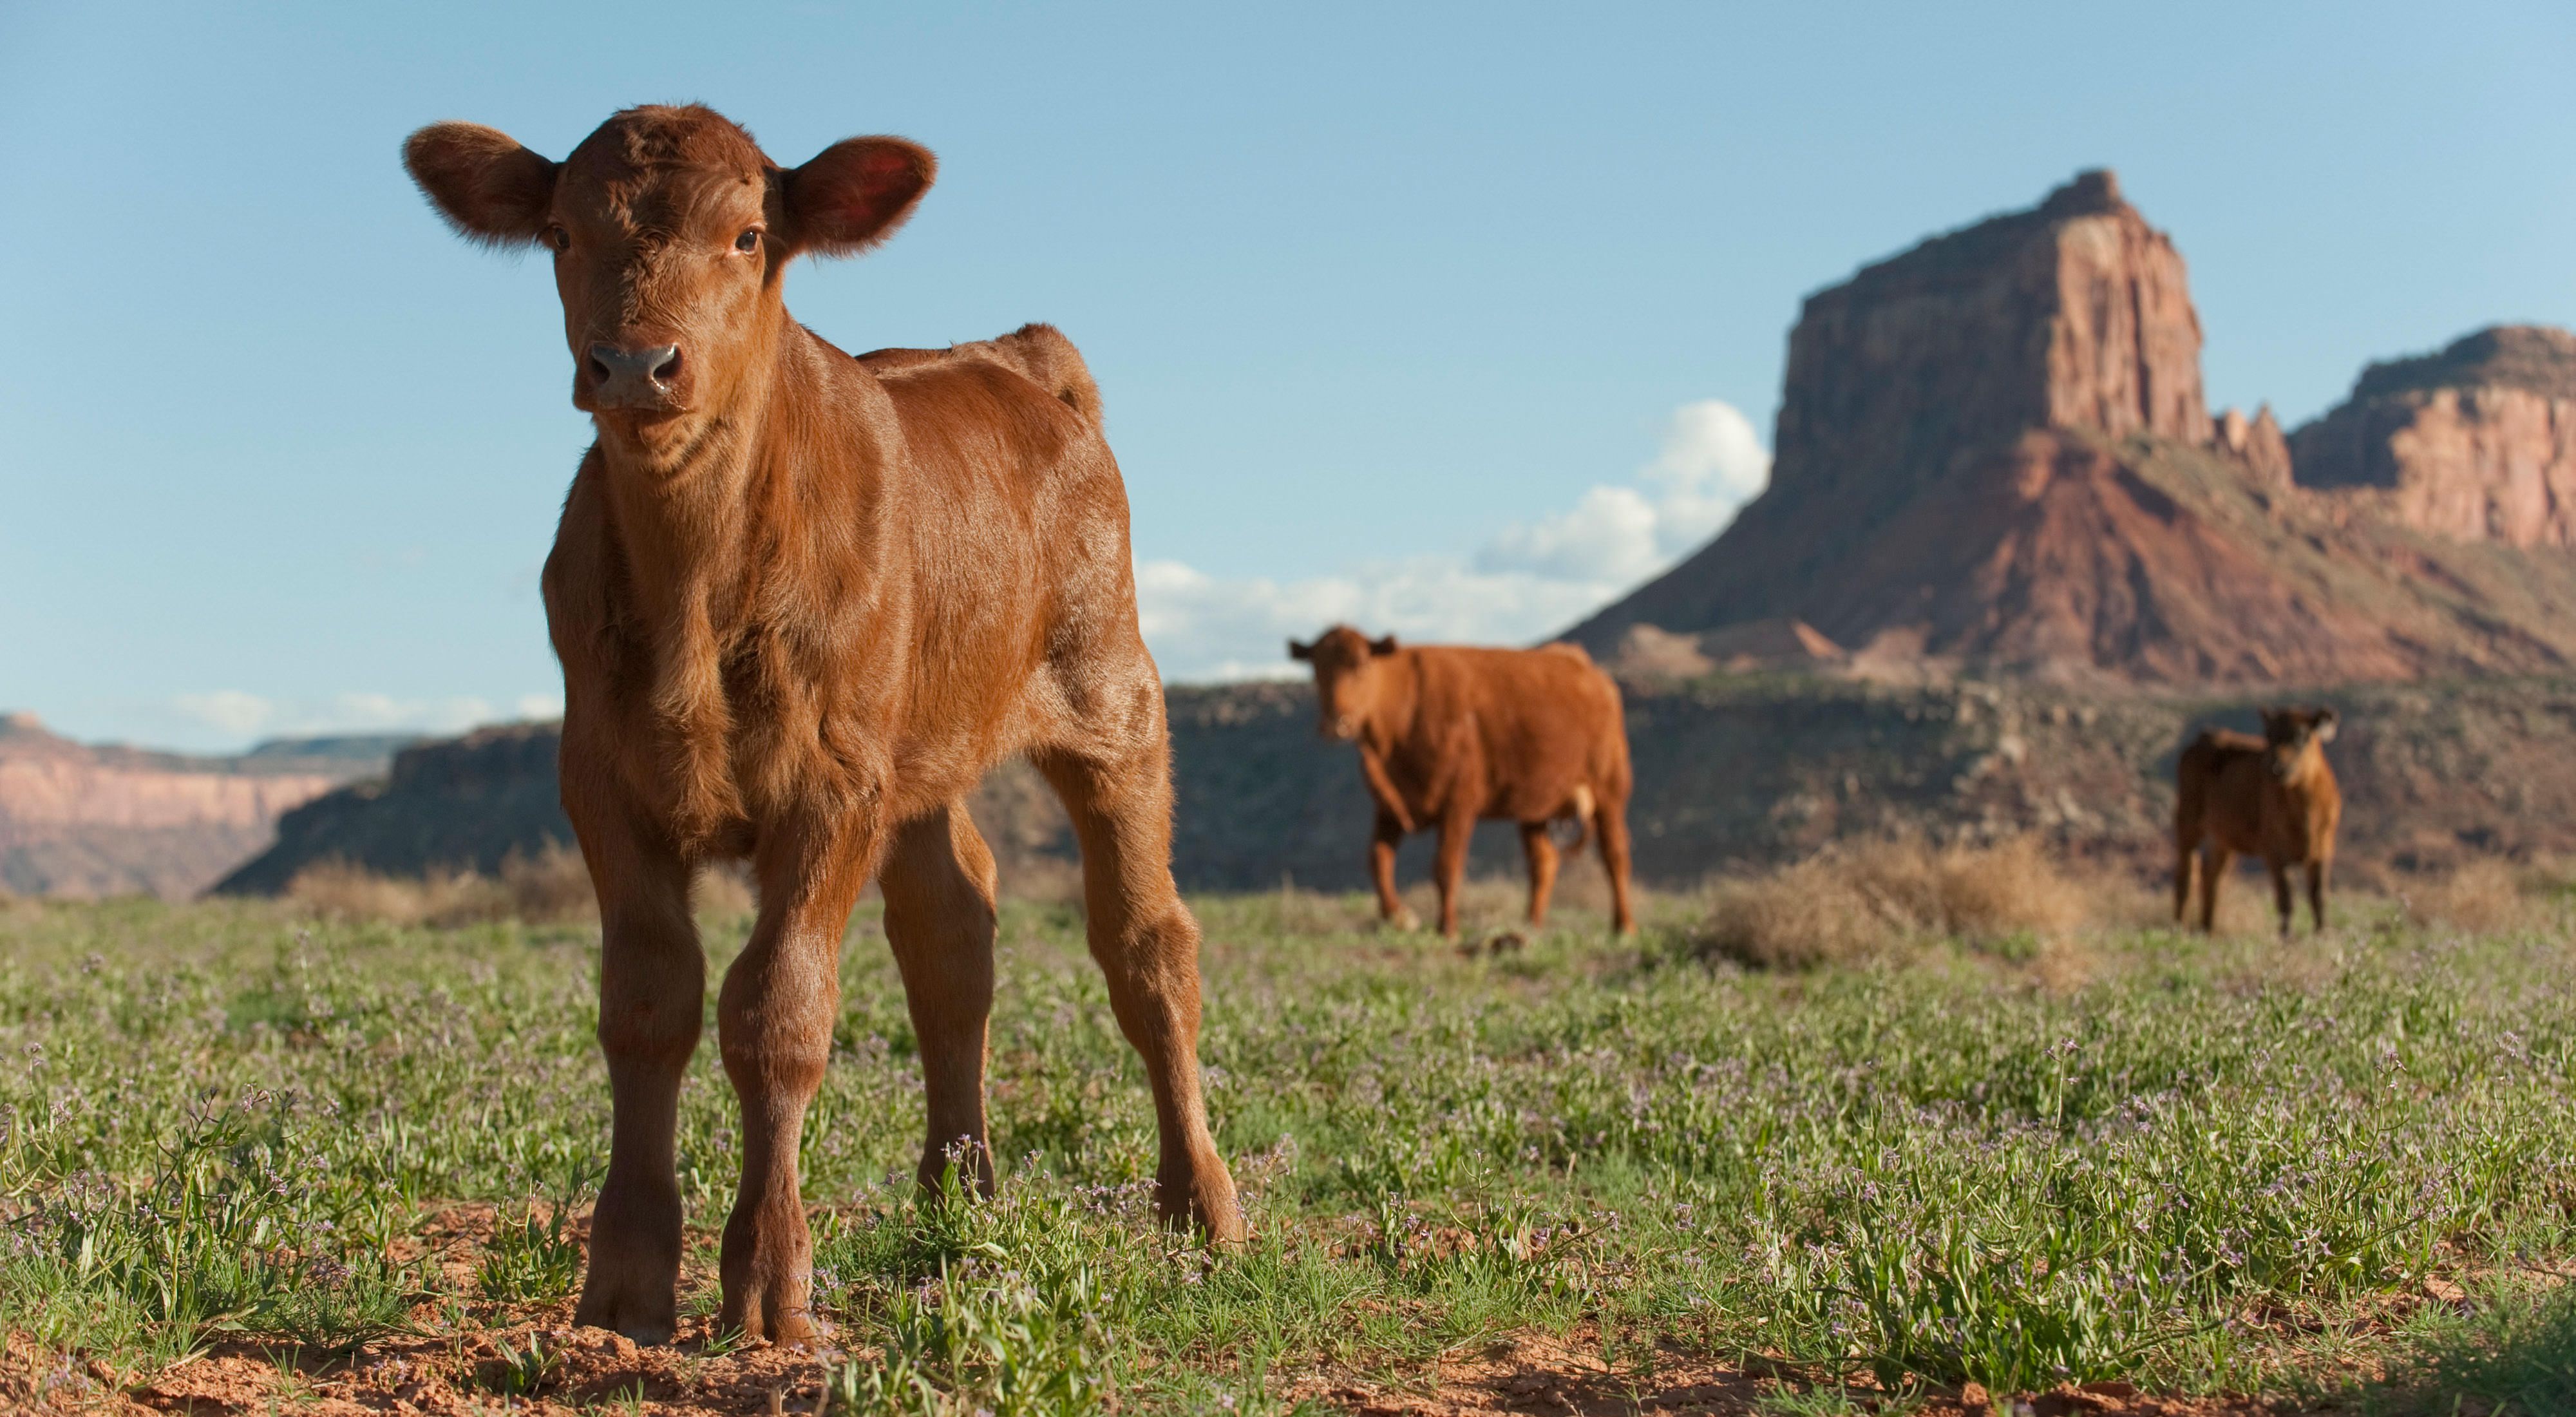 A calf and adult cattle standing in a pasture with a steep, rocky butte in the background.